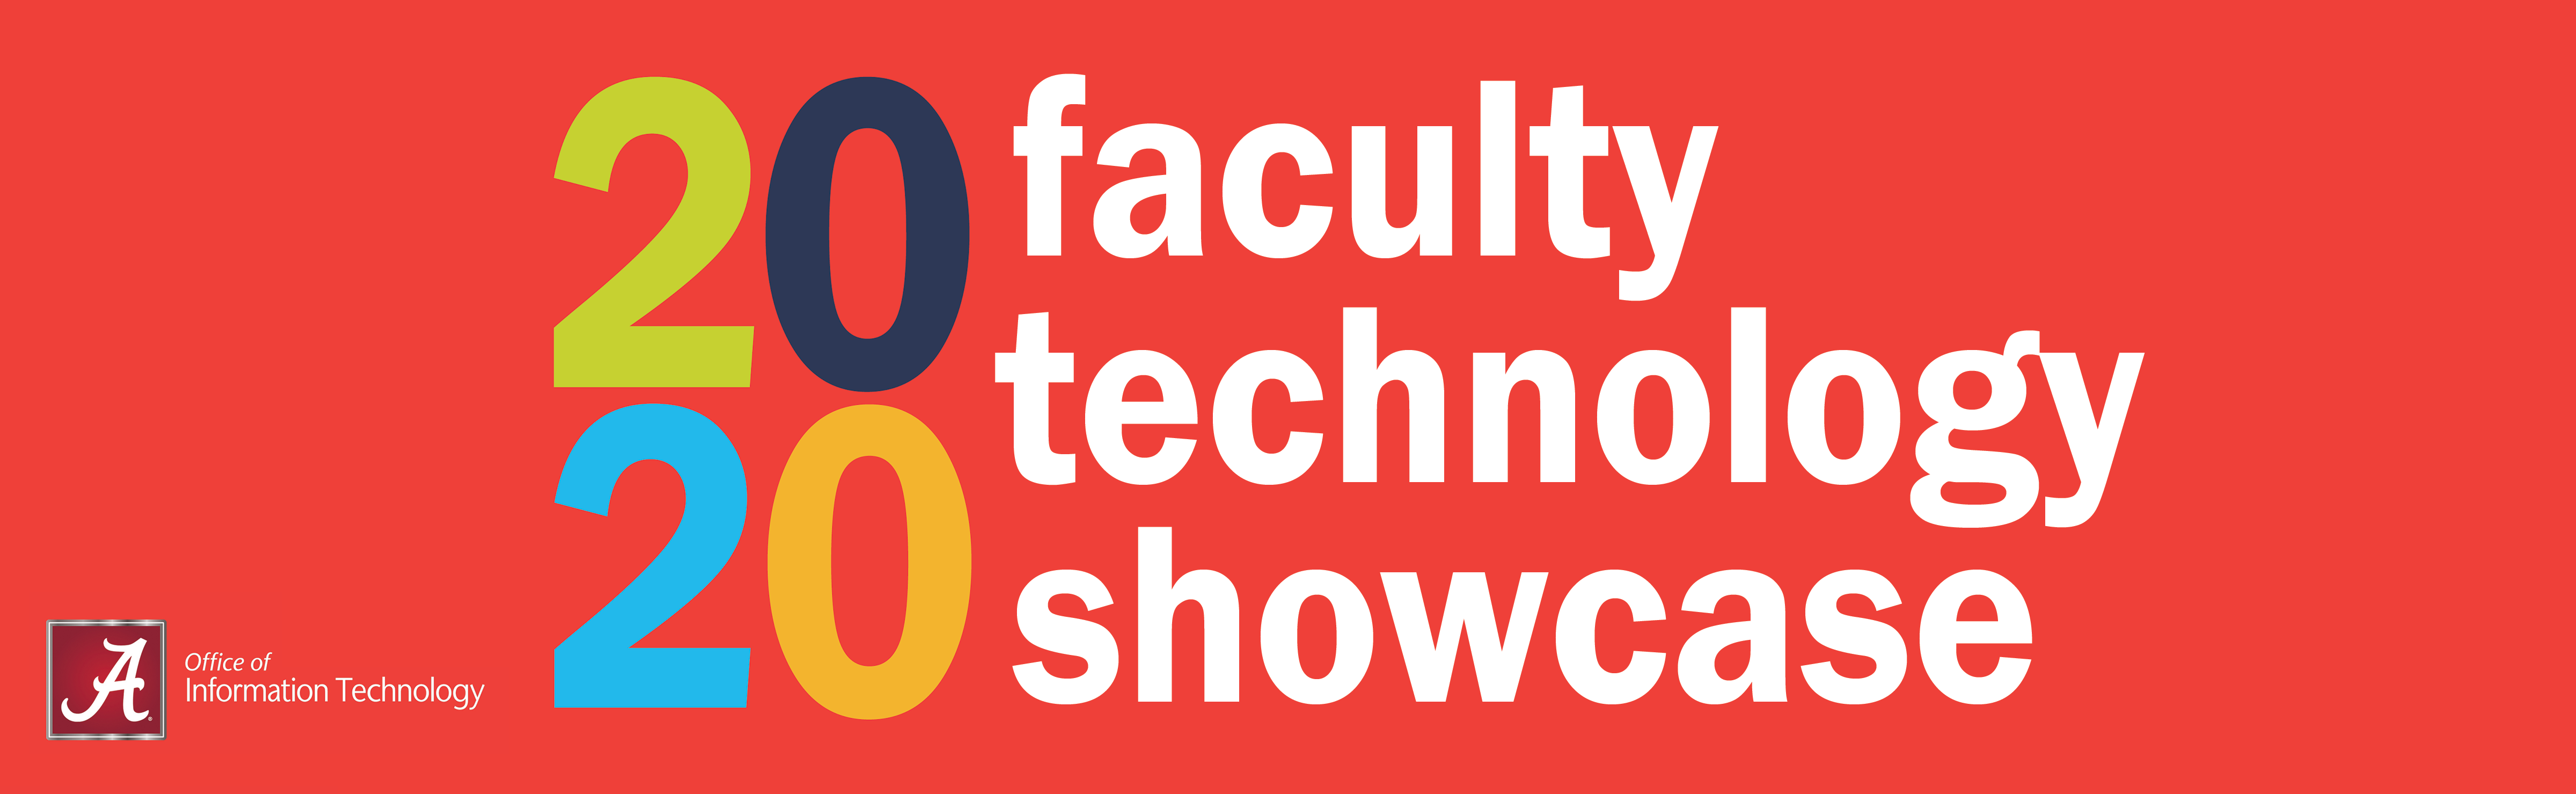 2020 Faculty Technology Showcase Banner with Office of Information Technology wordmark